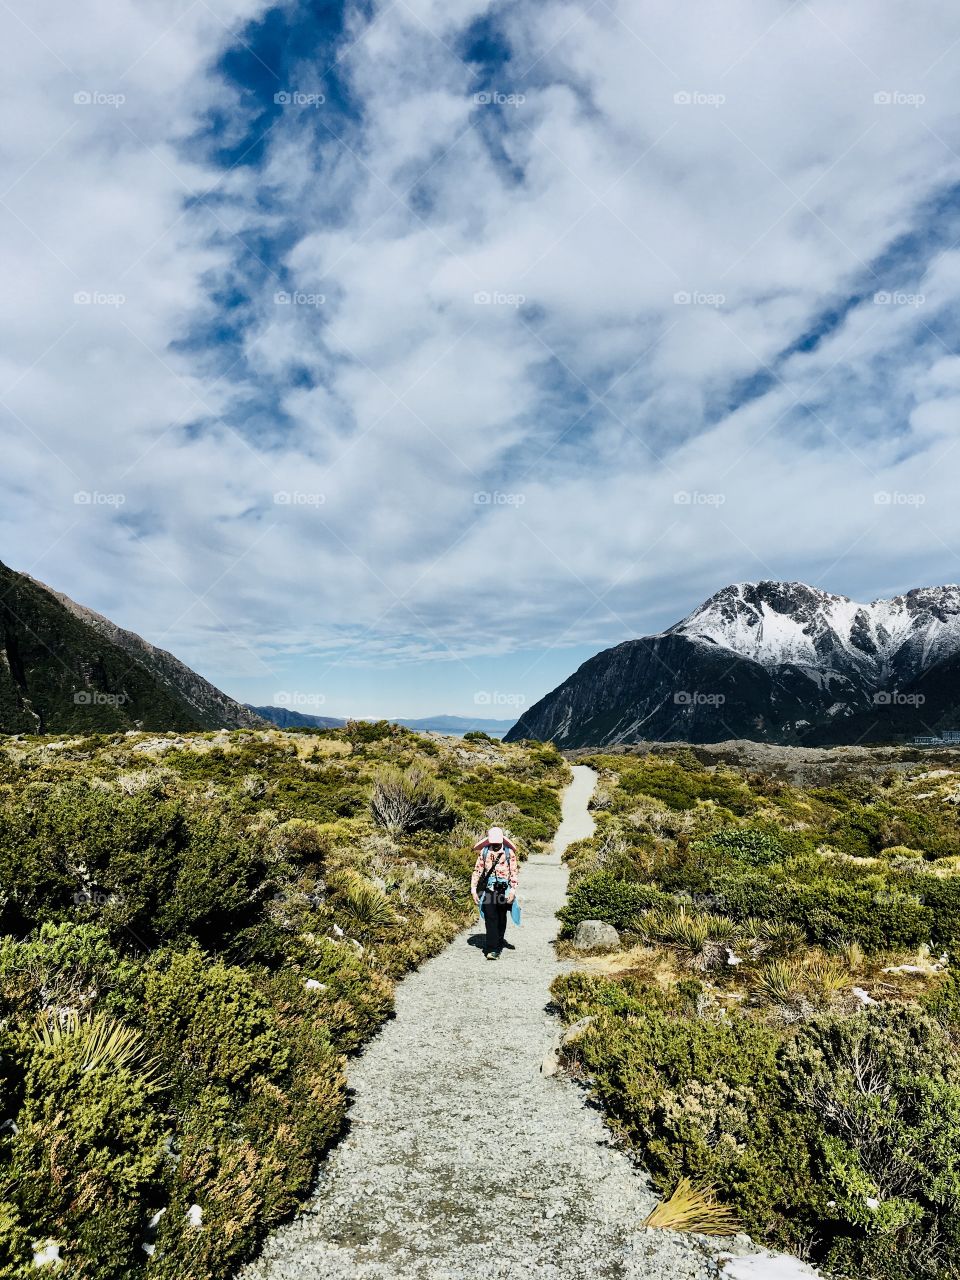 Tramping in the hooker valley